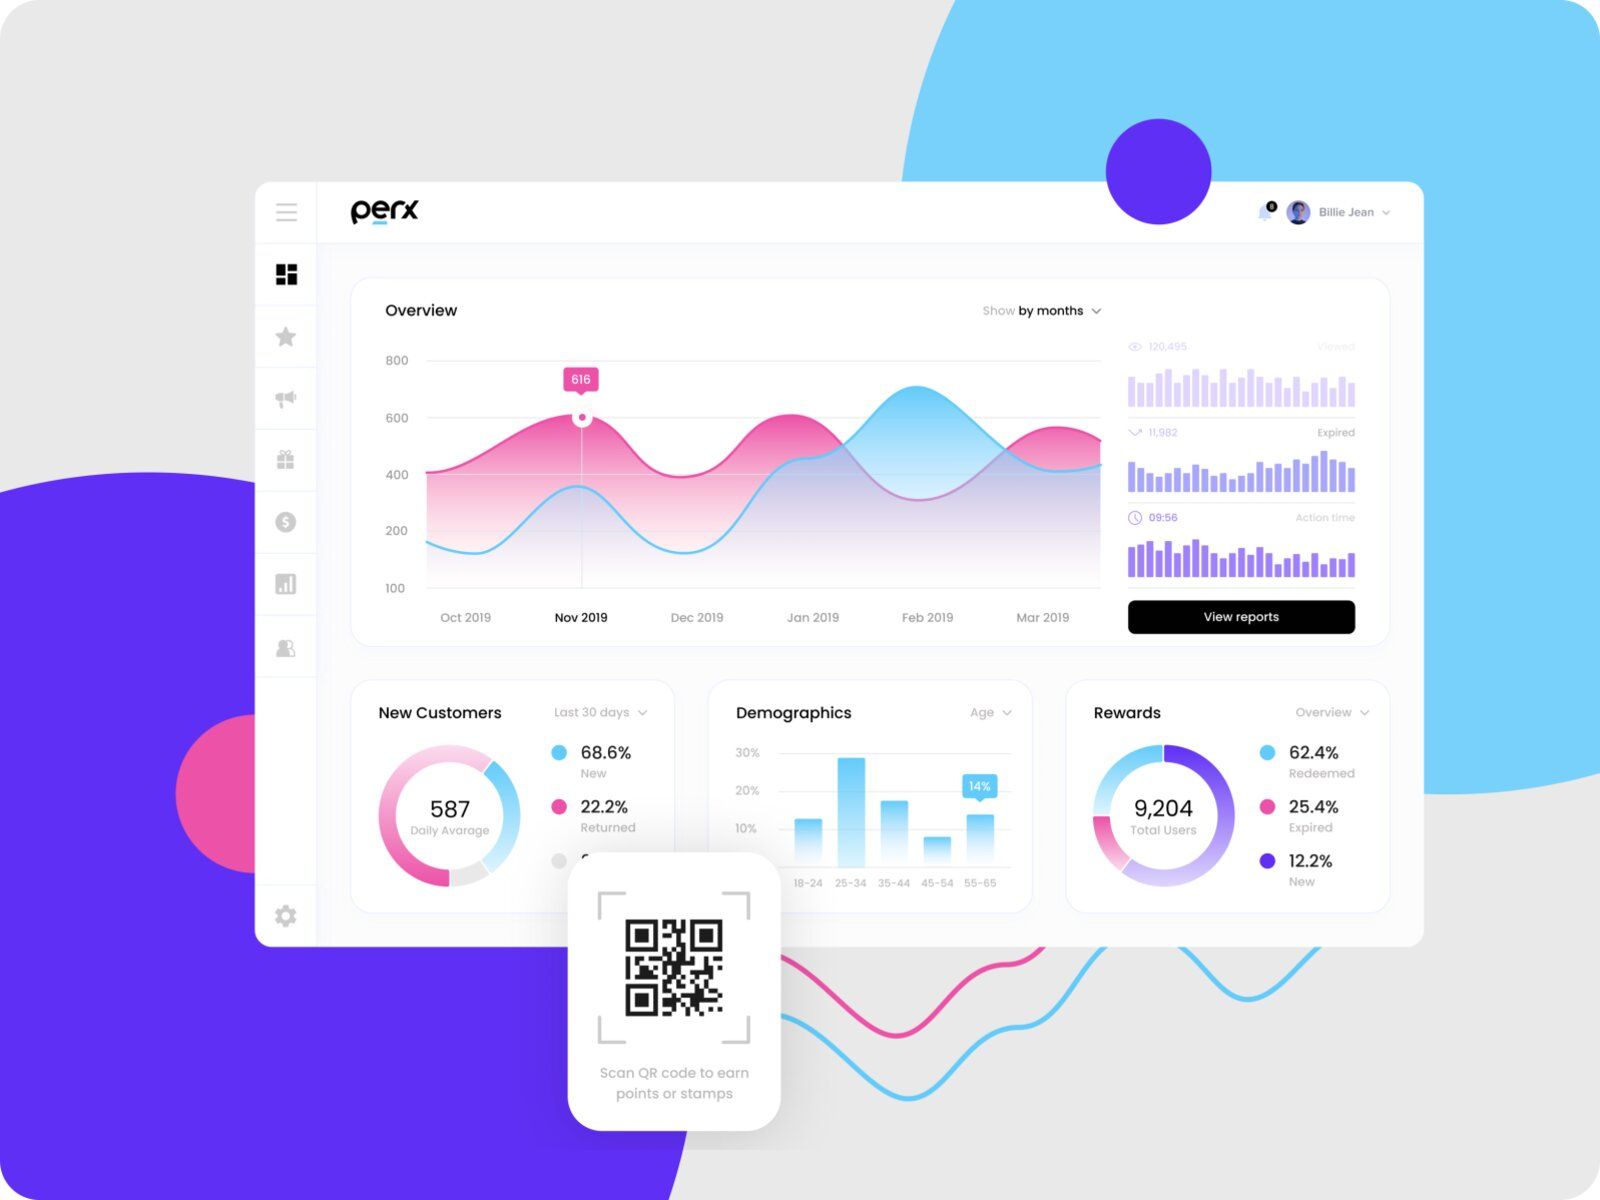 CRM functionality within web-based ERP software (*image by [ezh_inthe_tuman](https://dribbble.com/ezh_inthe_tuman){ rel="nofollow" target="_blank" .default-md}*)